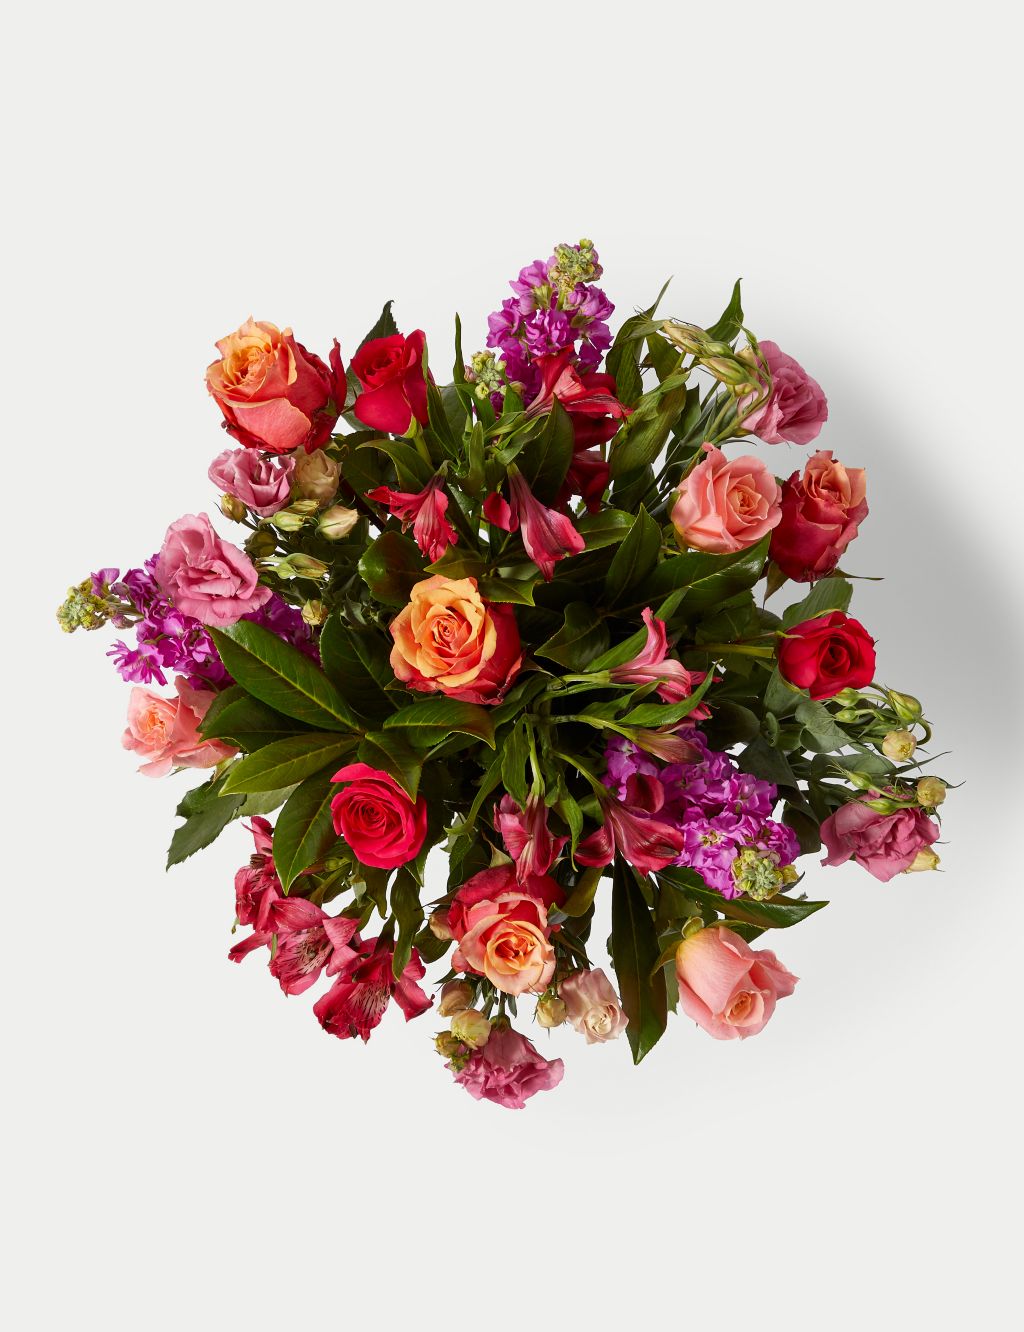 Roses, Lisianthus & Stock Bright Bouquet with Collection Caramel Chocolates